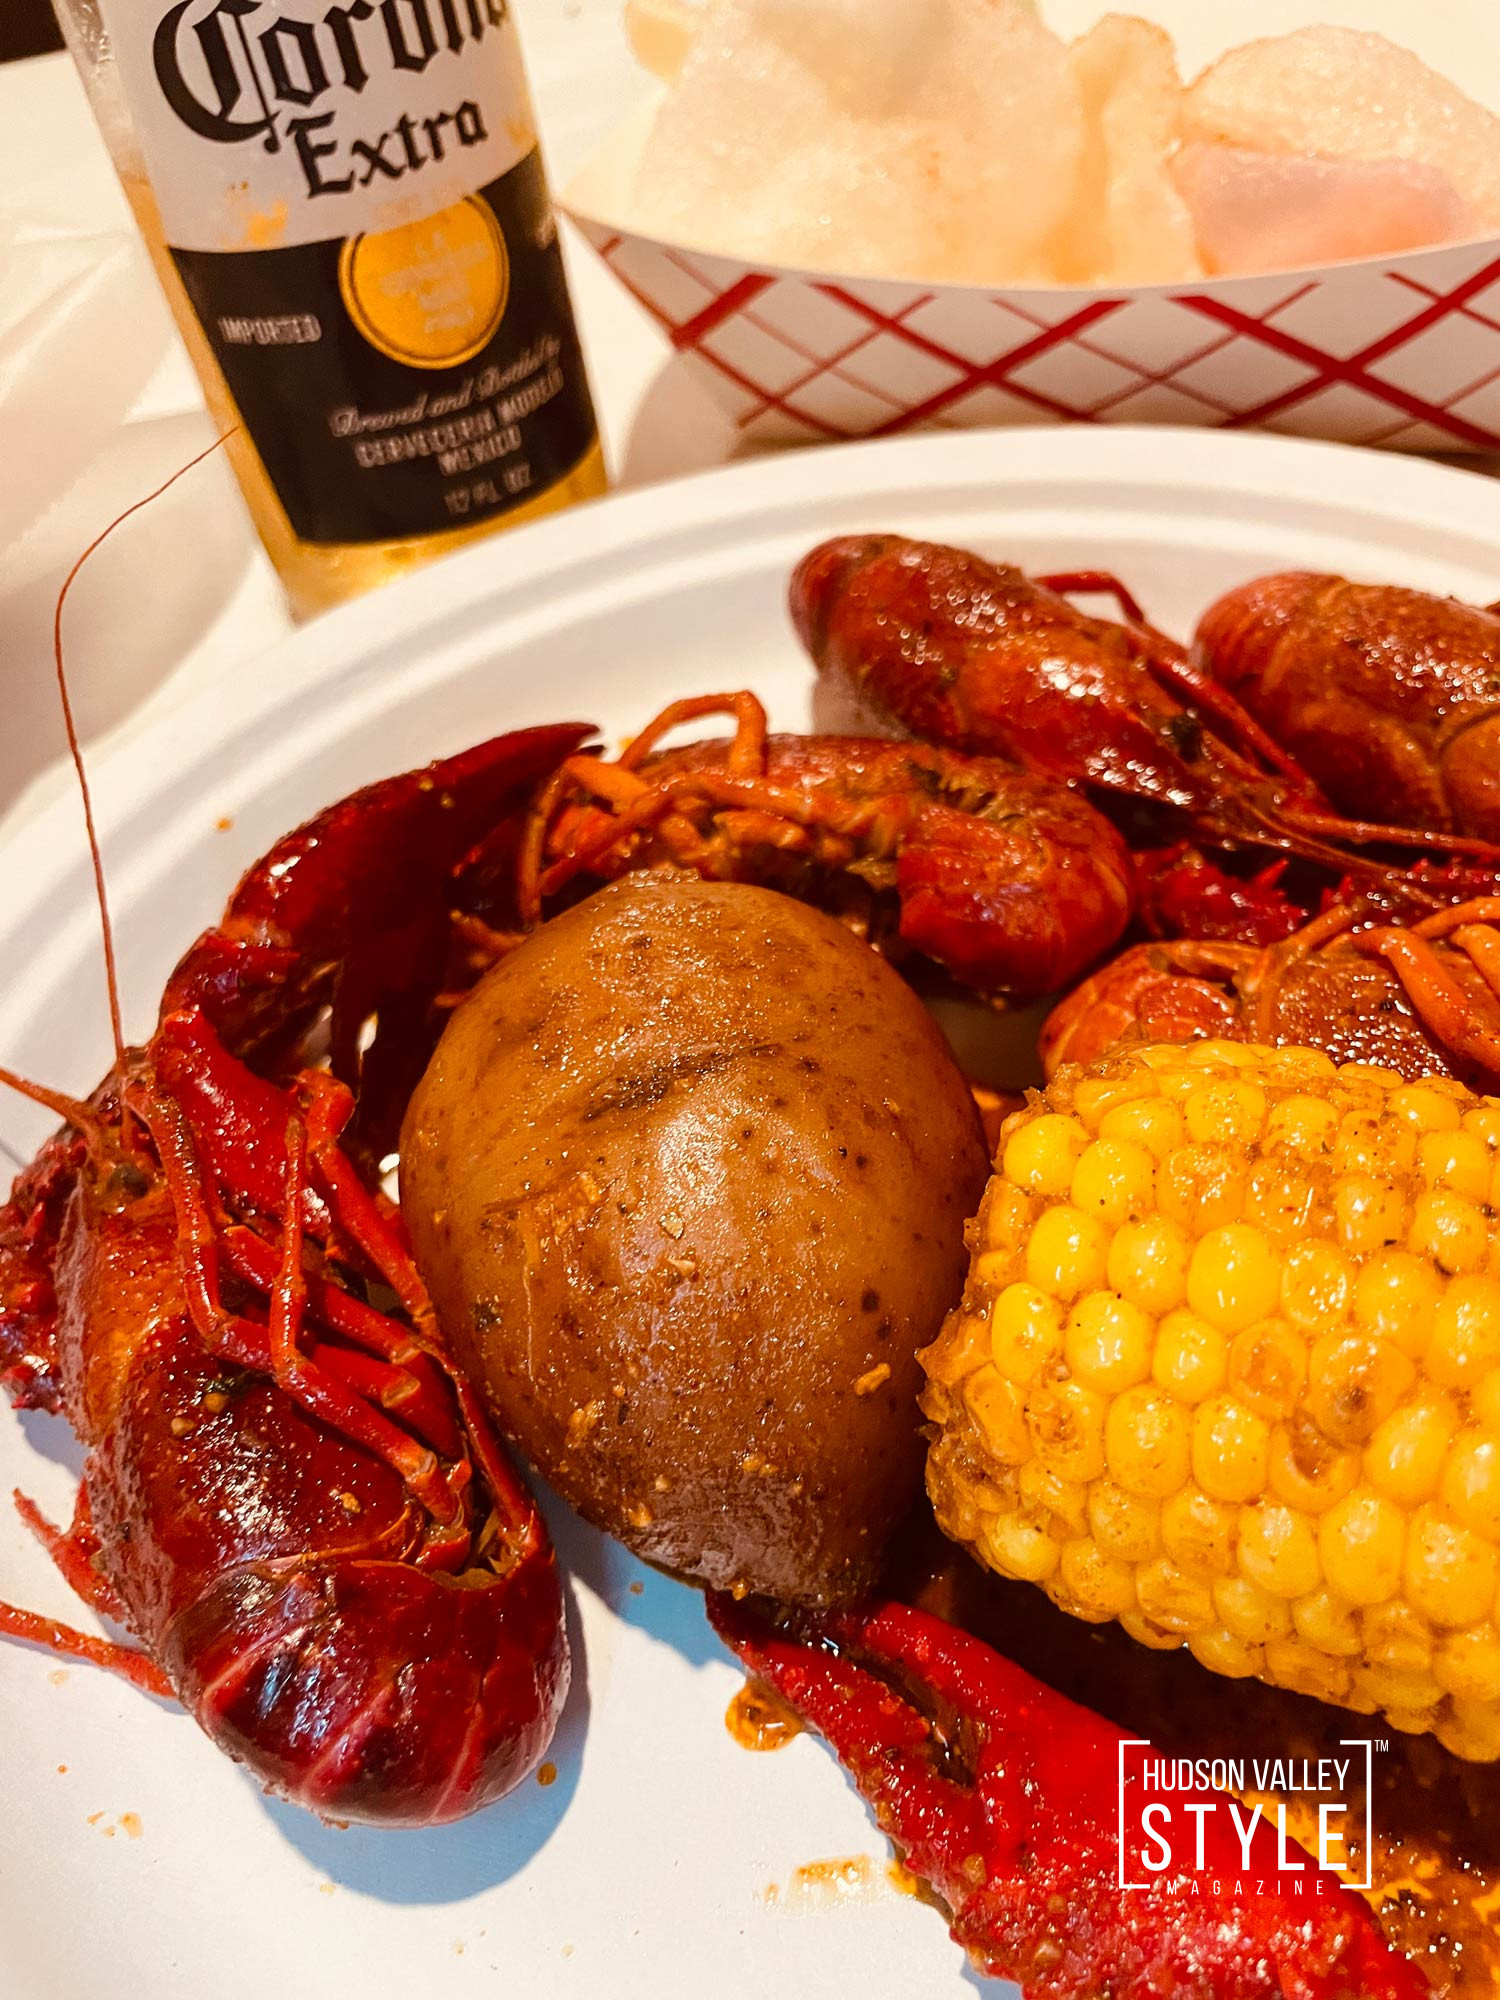 Cajun Craving: My First Time Trying Crawfish at the Tasty Crab House – Hudson Valley resaturant reviews with Maxwell Alexander – Presented by ALLUVION VACATIONS